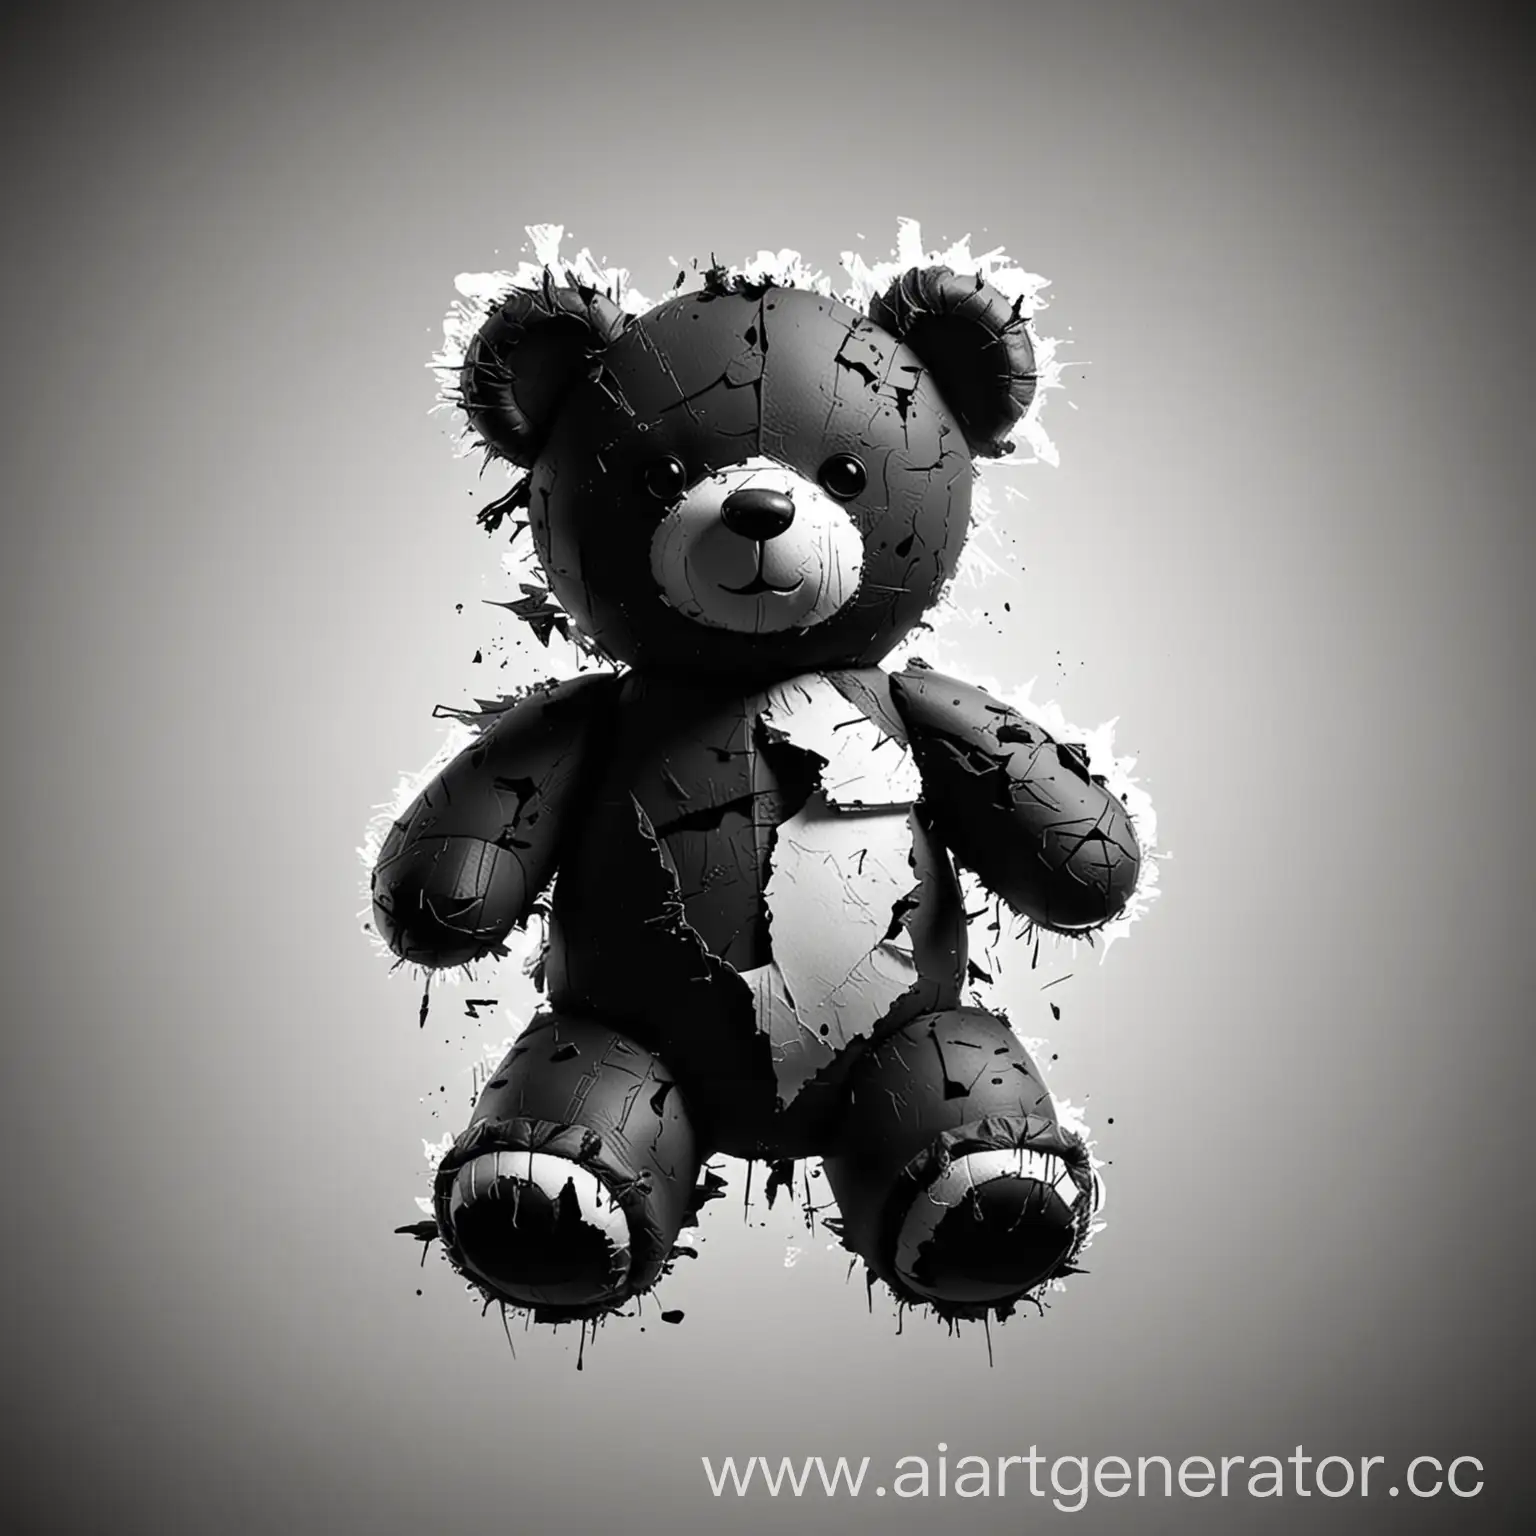 Silhouette-of-Torn-Teddy-Bear-Emotional-Contrast-in-Black-and-White